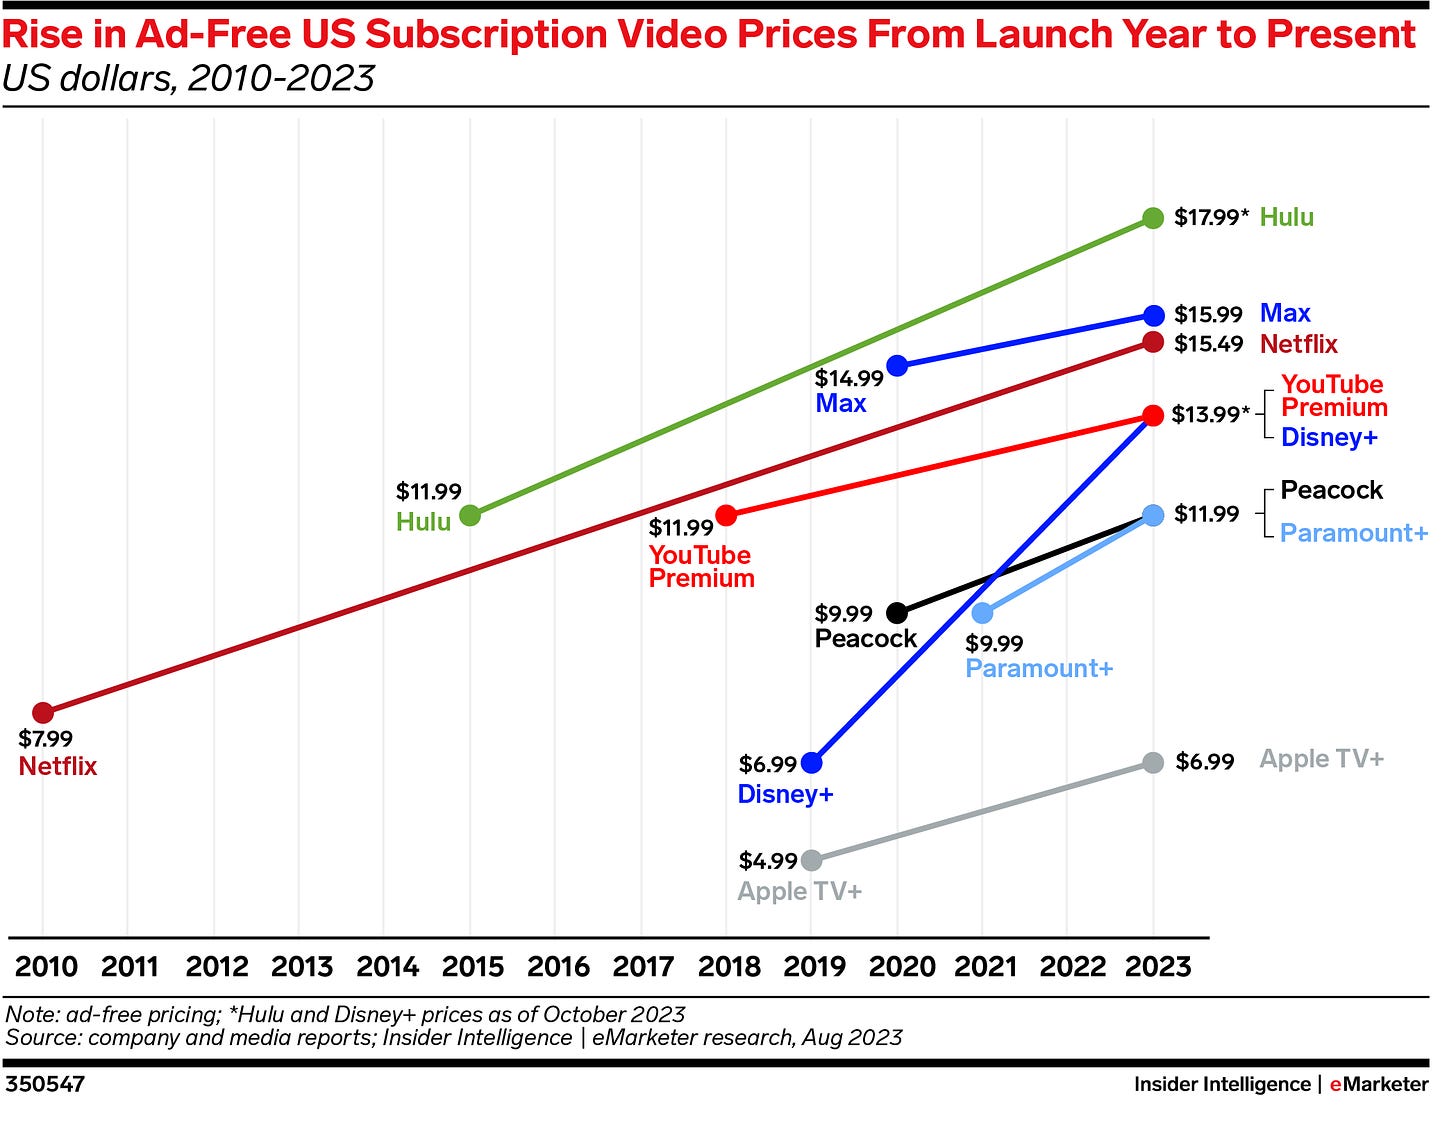 Seeking profitability, streamers increase subscription prices - Insider  Intelligence Trends, Forecasts & Statistics